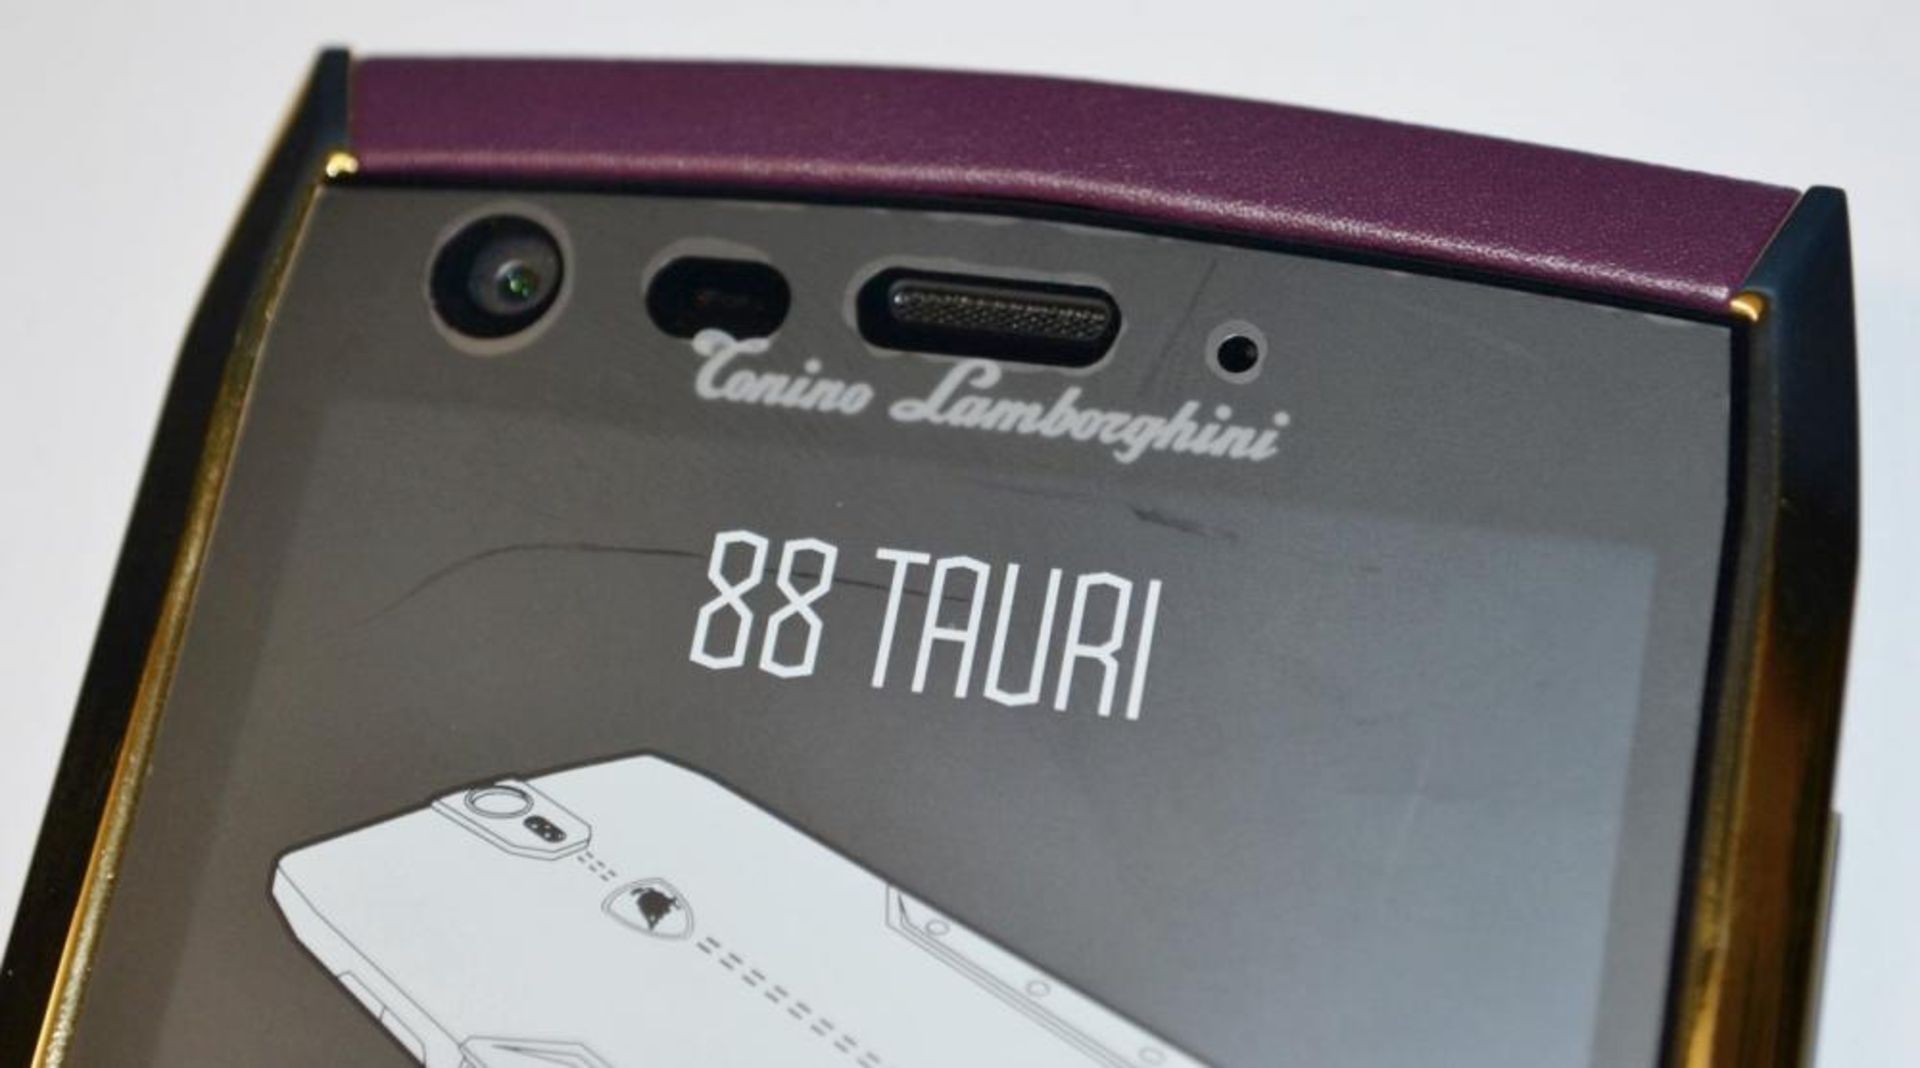 1 x Limited Edition Lamborghini "88 Tauri" Android Smart Phone - Art. 5522932 - Features Exquisite G - Image 5 of 18